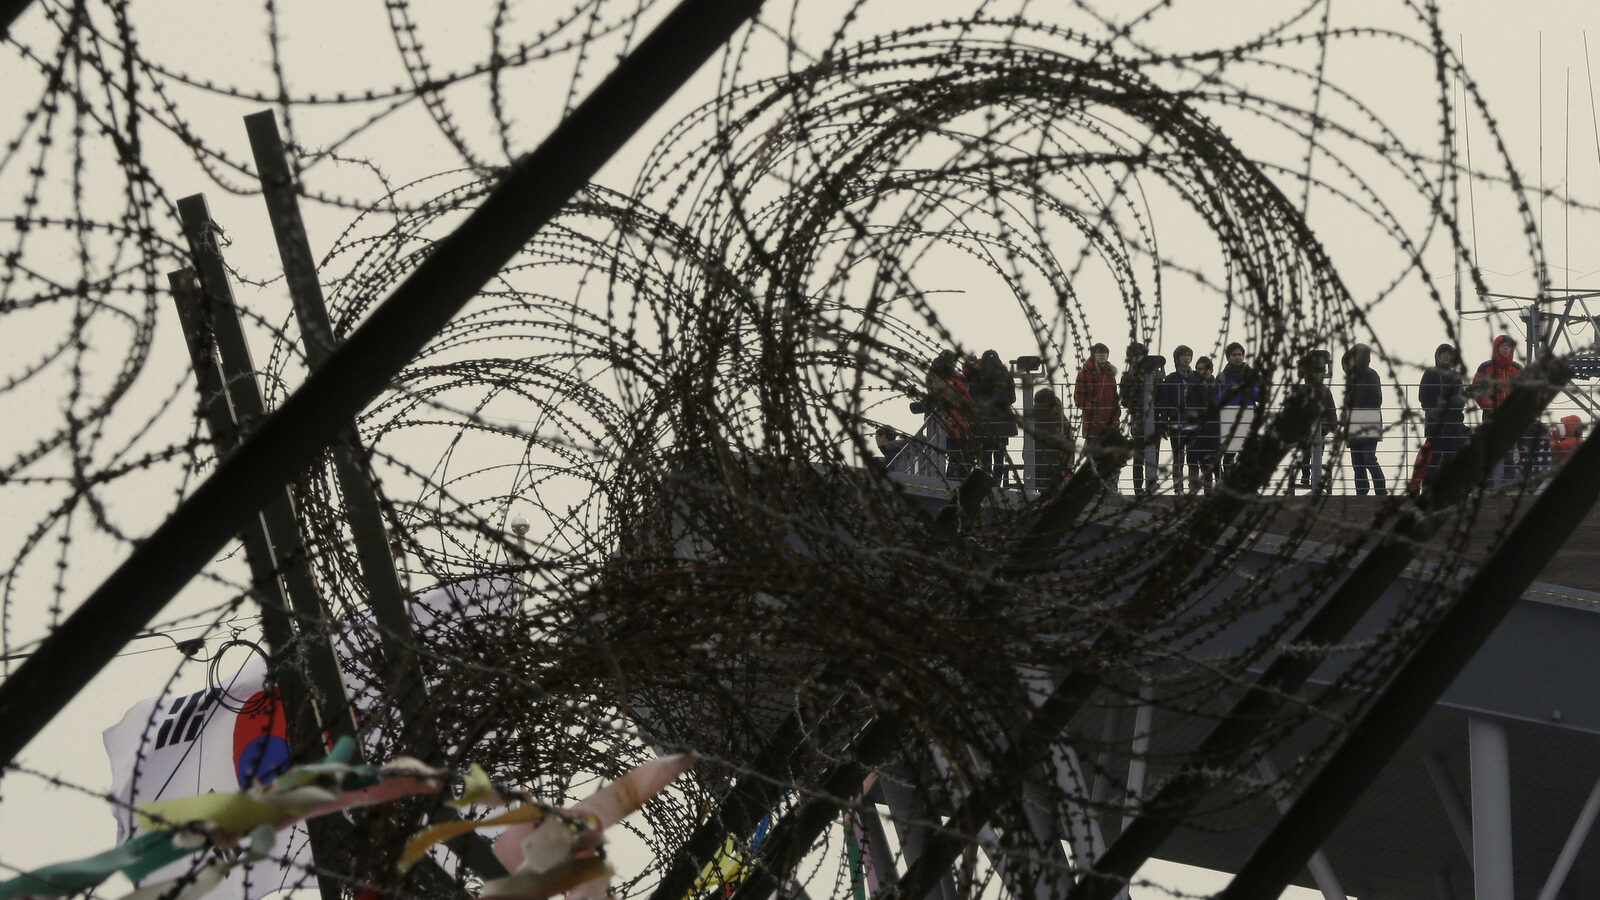 Visitors watching the North side are seen through barbed-wire entanglements as they visit Imjingak near the border village of the Panmunjom in Paju, South Korea, Monday, Feb. 8, 2016. The U.N. Security Council condemned North Korea's launch of a long-range rocket that world leaders called a banned test of ballistic missile technology and another "intolerable provocation." The U.N.'s most powerful body pledged to quickly adopt a new resolution with "significant" new sanctions. (AP Photo/Ahn Young-joon)